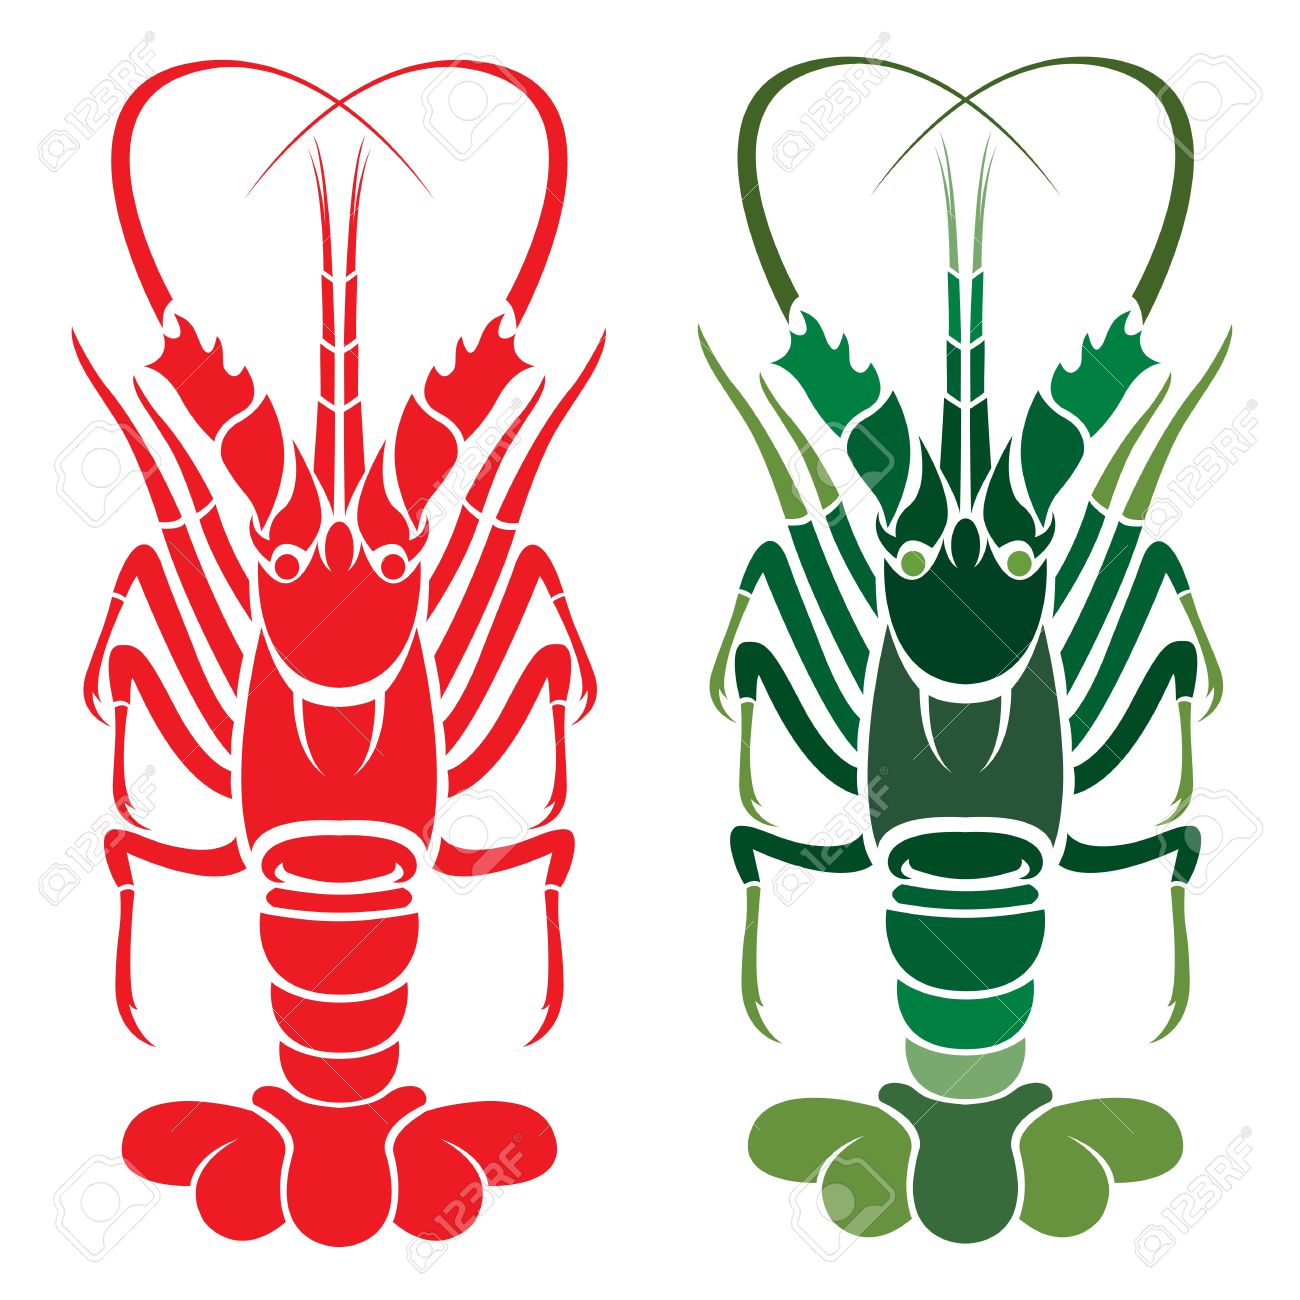 Spiny Lobster clipart #8, Download drawings